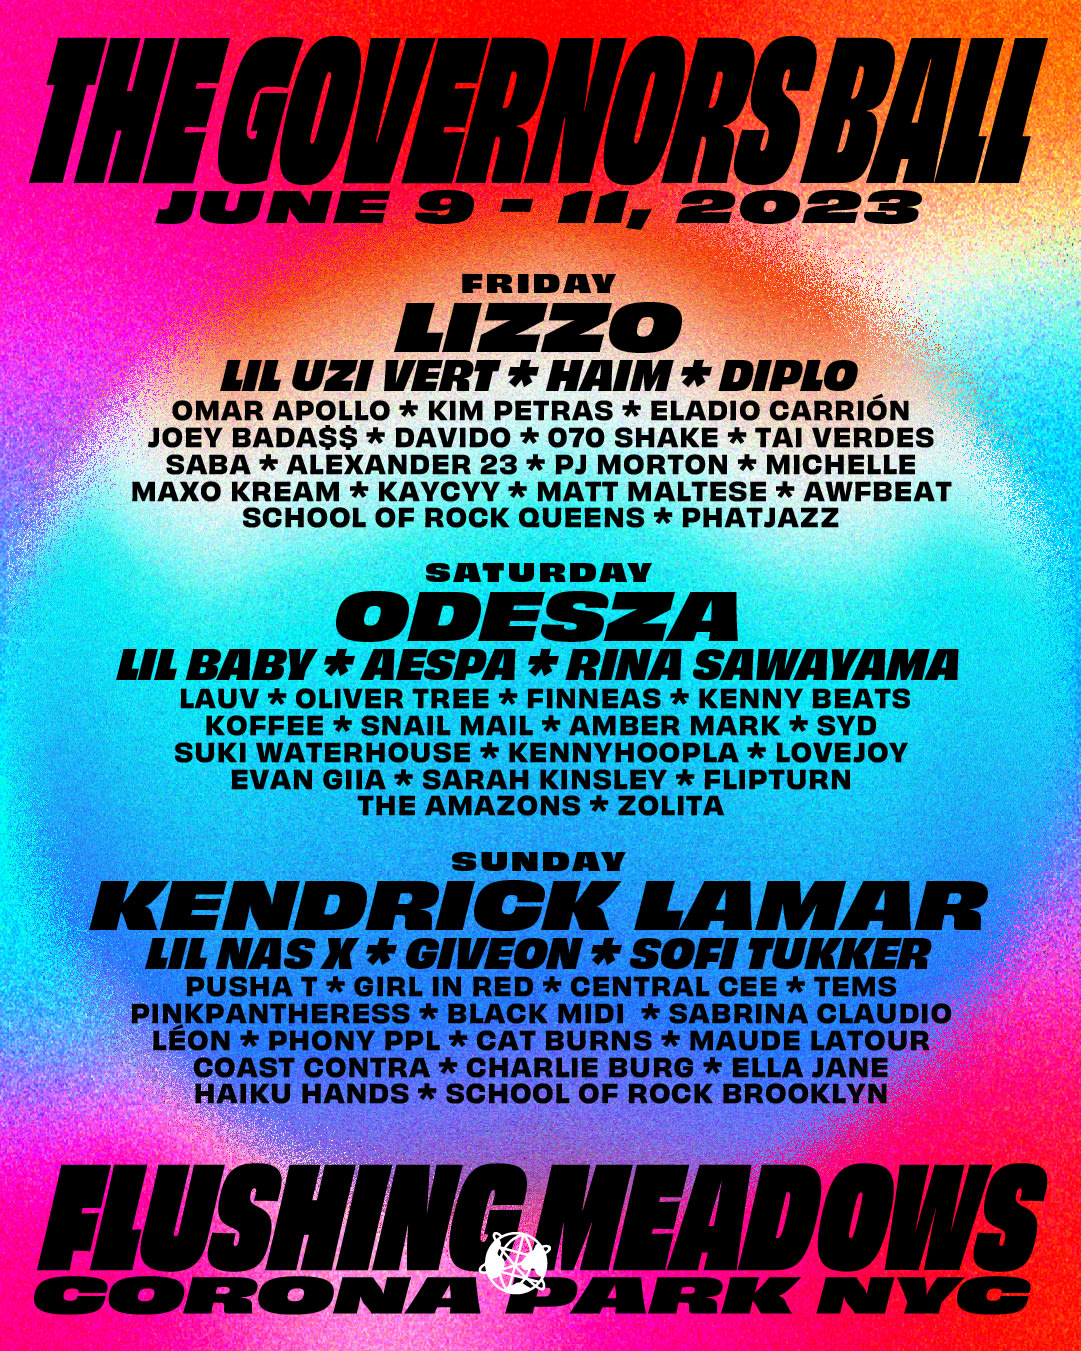 Governors Ball 2023 lineup flyer is pictured